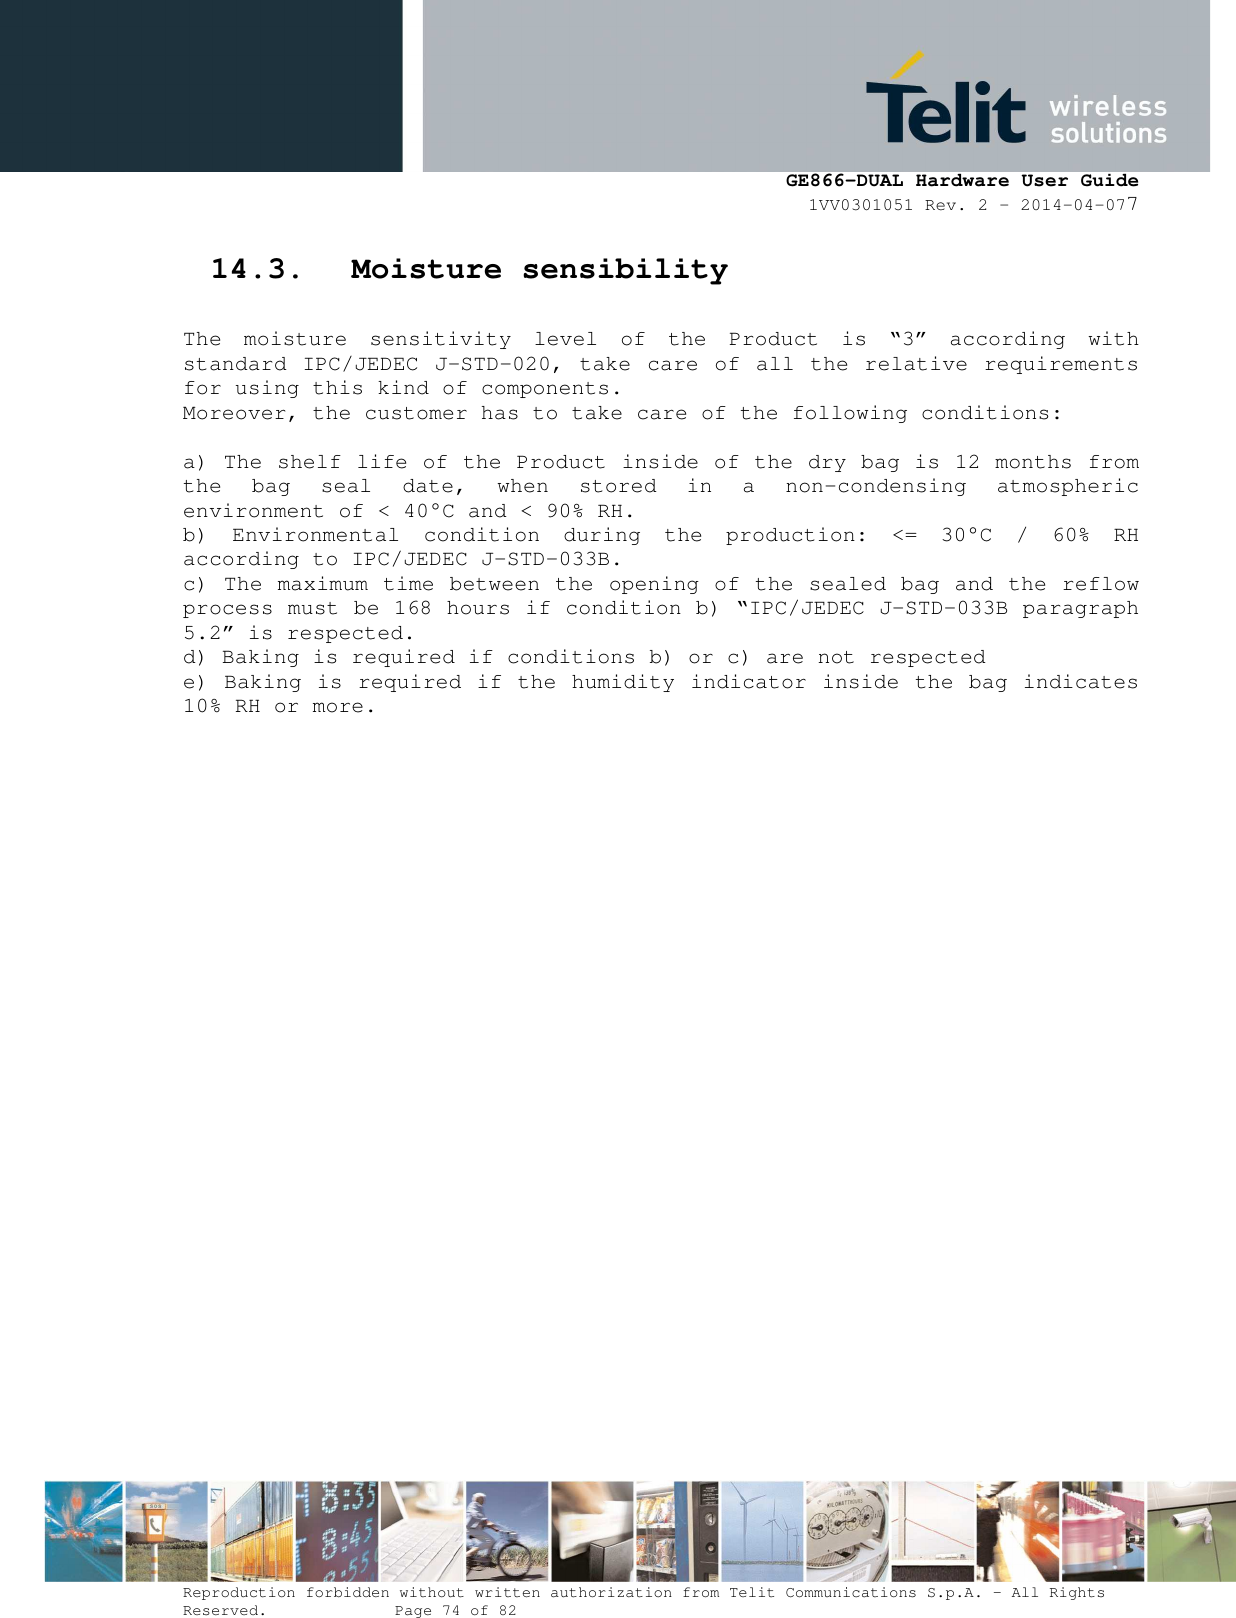      GE866-DUAL Hardware User Guide 1VV0301051 Rev. 2 – 2014-04-077  Reproduction forbidden without written authorization from Telit Communications S.p.A. - All Rights Reserved.    Page 74 of 82 Mod. 0805 2011-07 Rev.2 14.3. Moisture sensibility  The  moisture  sensitivity  level  of  the  Product  is  “3”  according  with standard IPC/JEDEC J-STD-020, take  care of  all the relative requirements for using this kind of components. Moreover, the customer has to take care of the following conditions:  a) The shelf life of the Product inside of the dry bag is 12 months from the  bag  seal  date,  when  stored  in  a  non-condensing  atmospheric environment of &lt; 40°C and &lt; 90% RH. b)  Environmental  condition  during  the  production:  &lt;=  30°C  /  60%  RH according to IPC/JEDEC J-STD-033B. c) The maximum time between the opening of the sealed bag and the reflow process must be 168 hours if condition b) “IPC/JEDEC J-STD-033B paragraph 5.2” is respected. d) Baking is required if conditions b) or c) are not respected e) Baking is required if the humidity indicator inside the bag indicates 10% RH or more.        